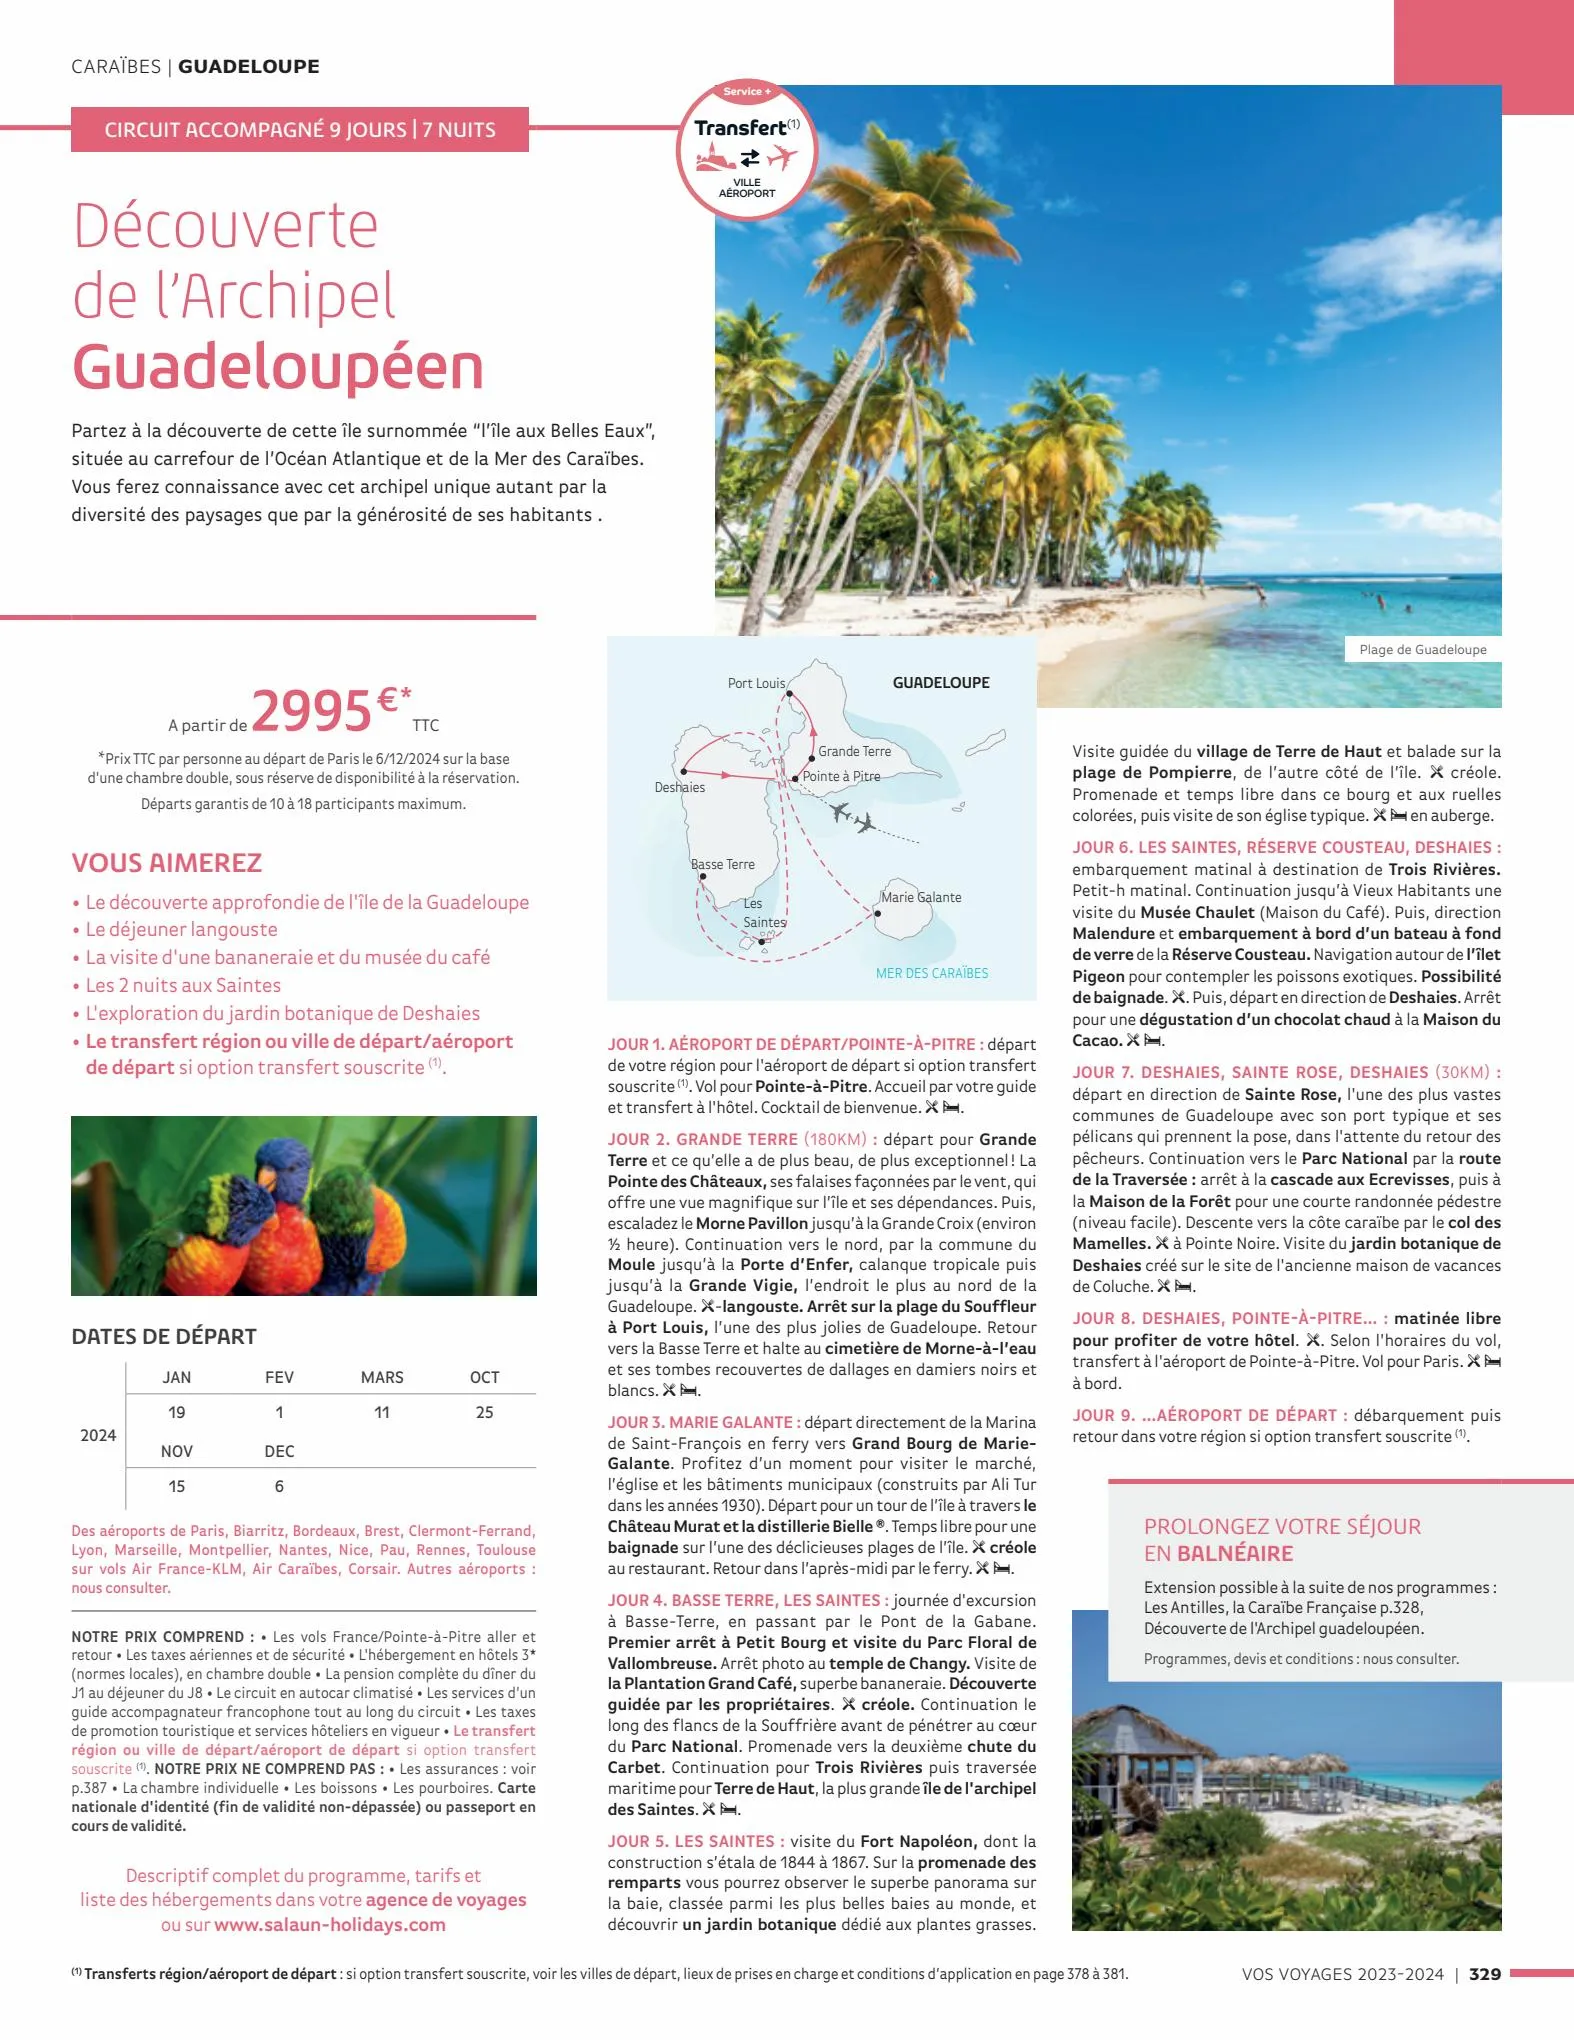 Catalogue Vos voyages 2023-2024, page 00329